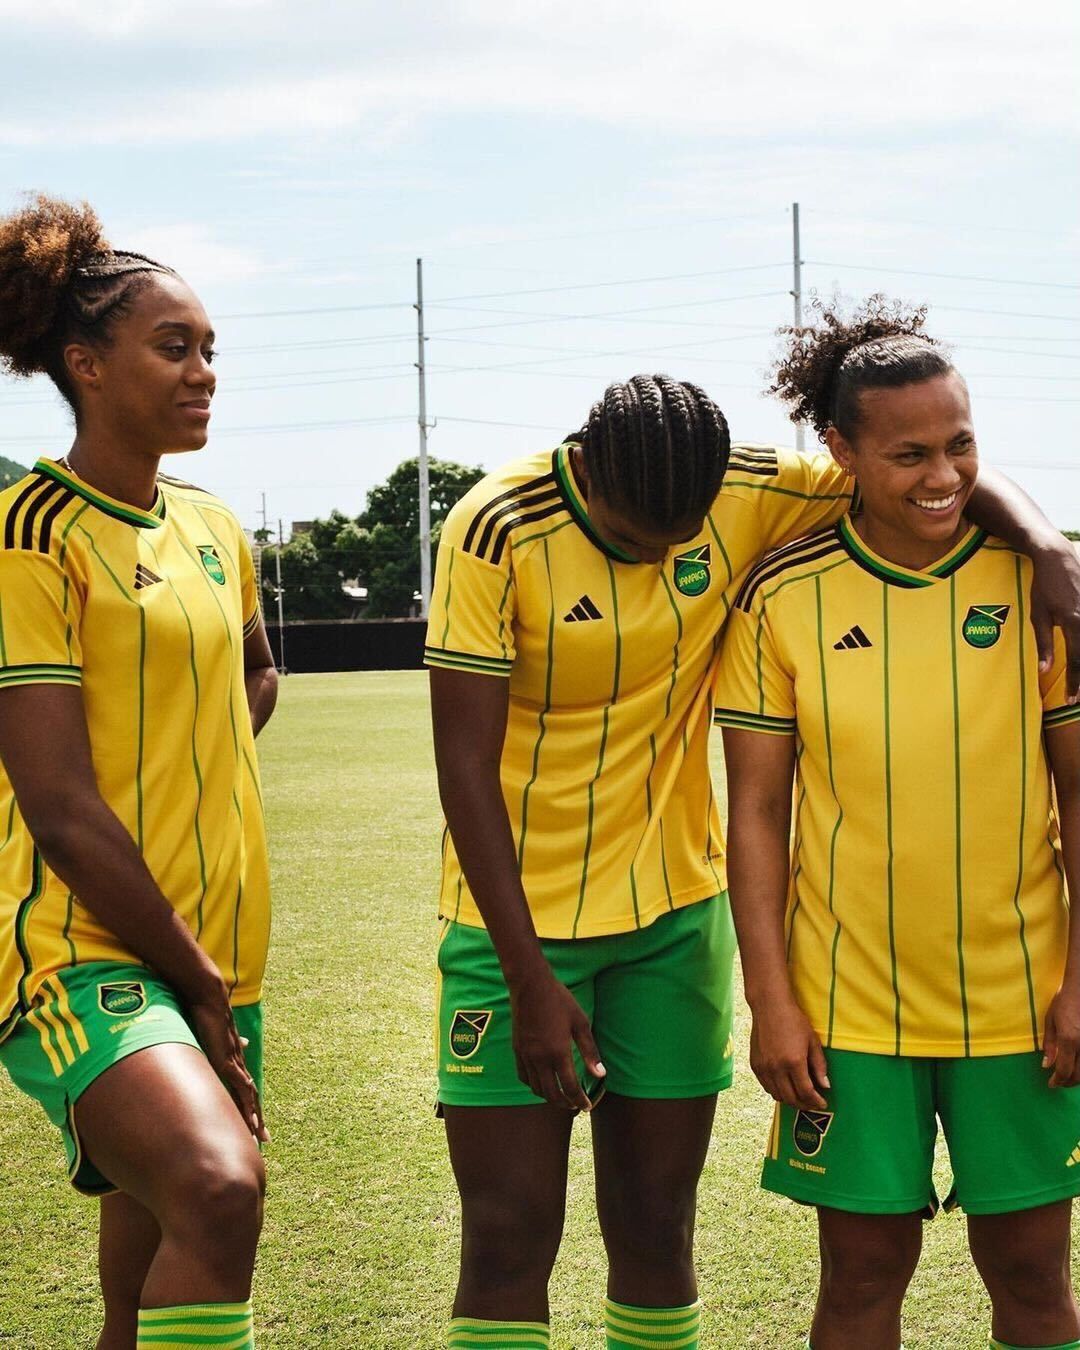 The new adidas design Jamaican national team jerseys are here